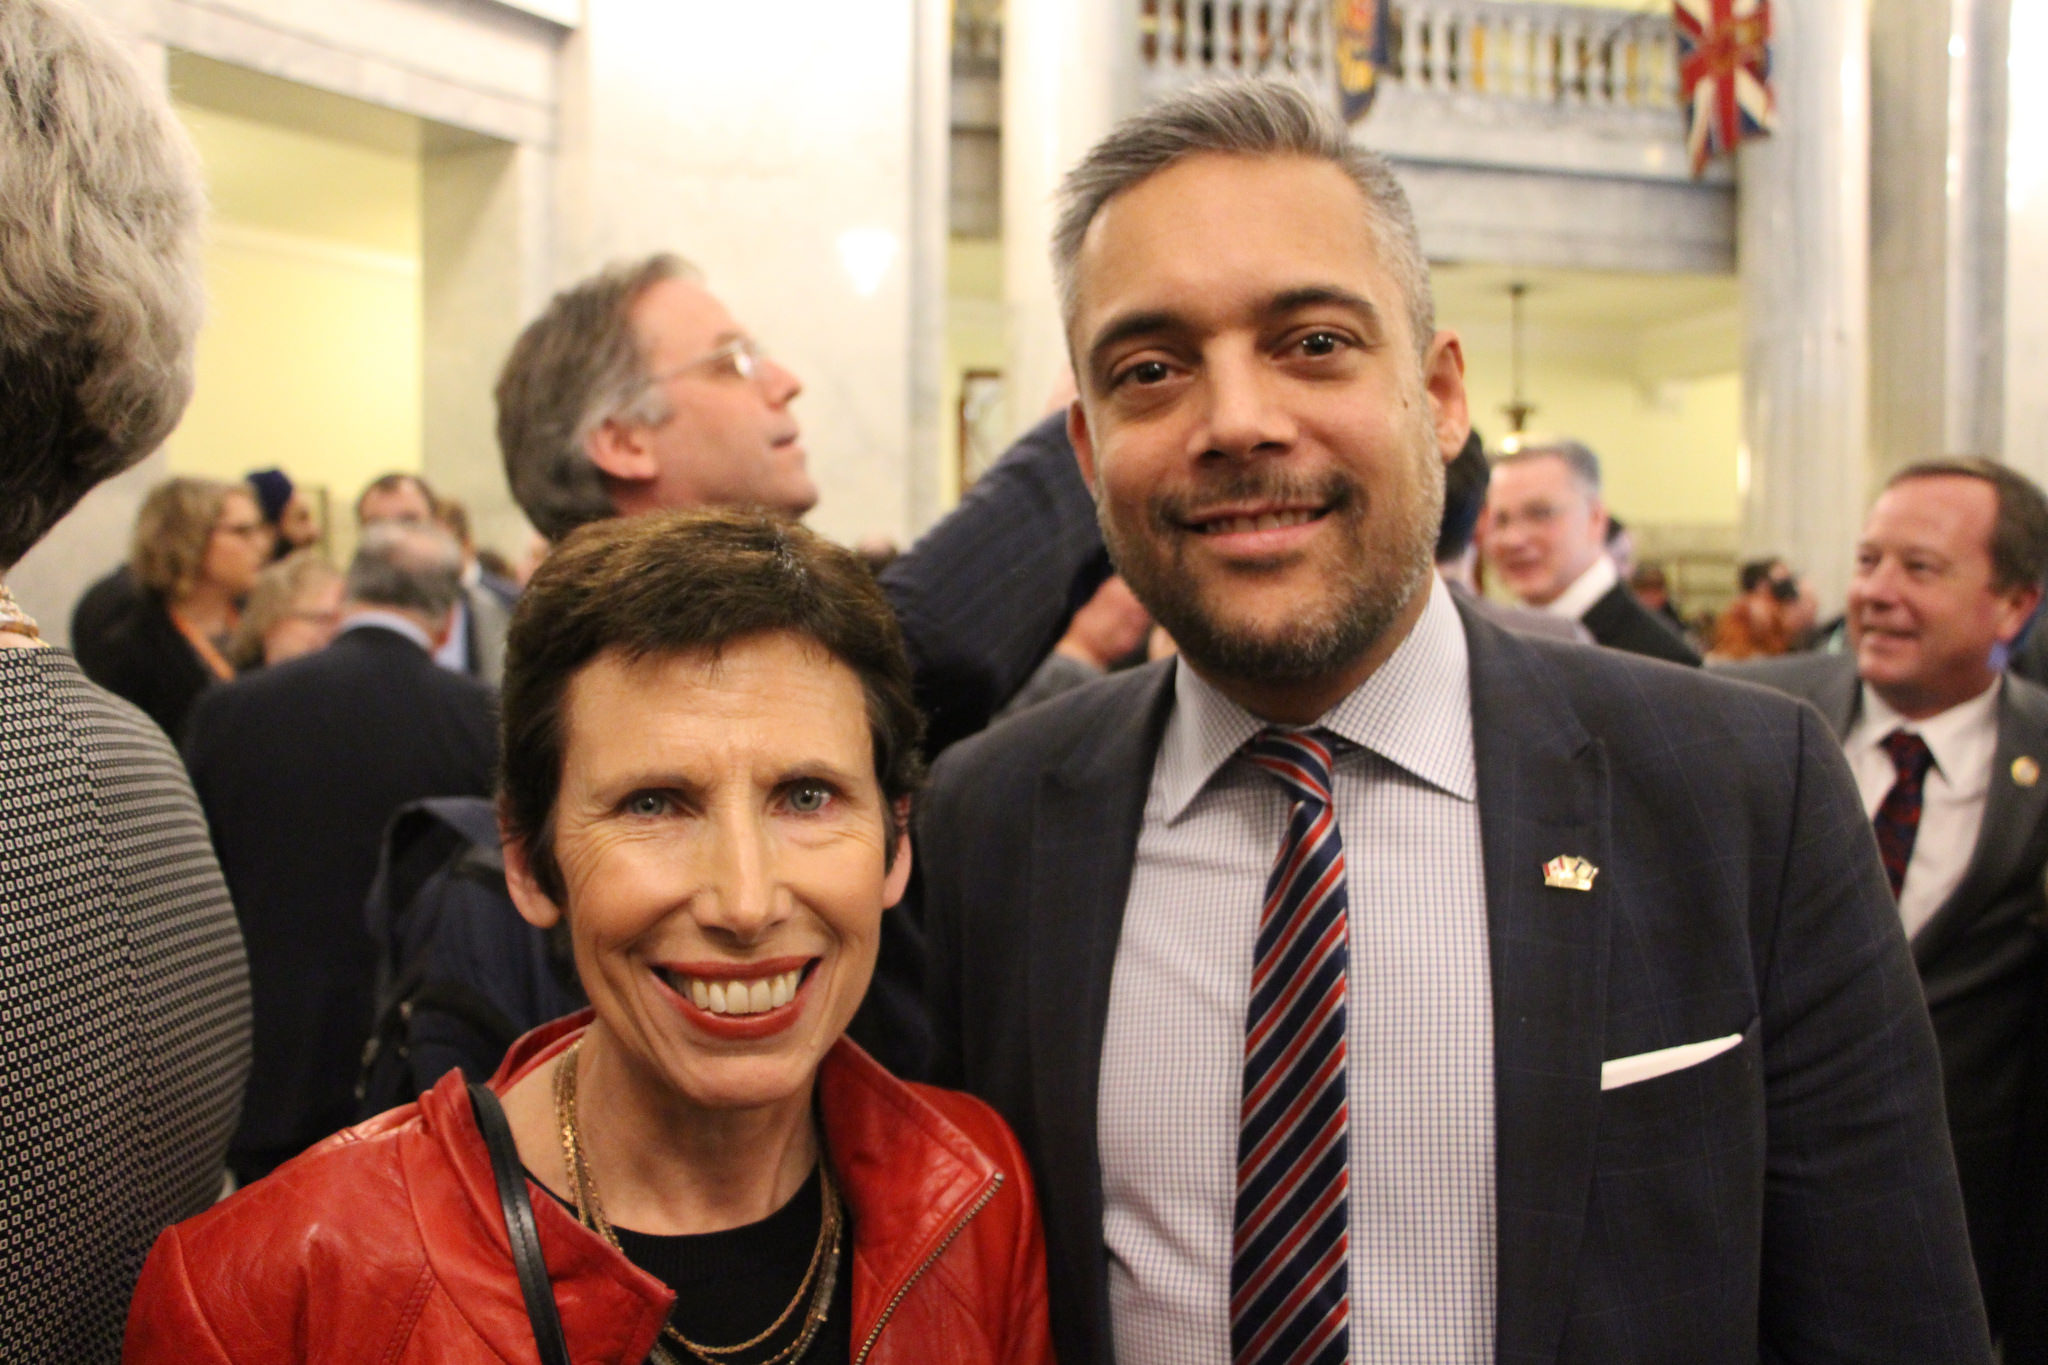 David Khan, seen here with Liberal Party executive director Gwyneth Midgley